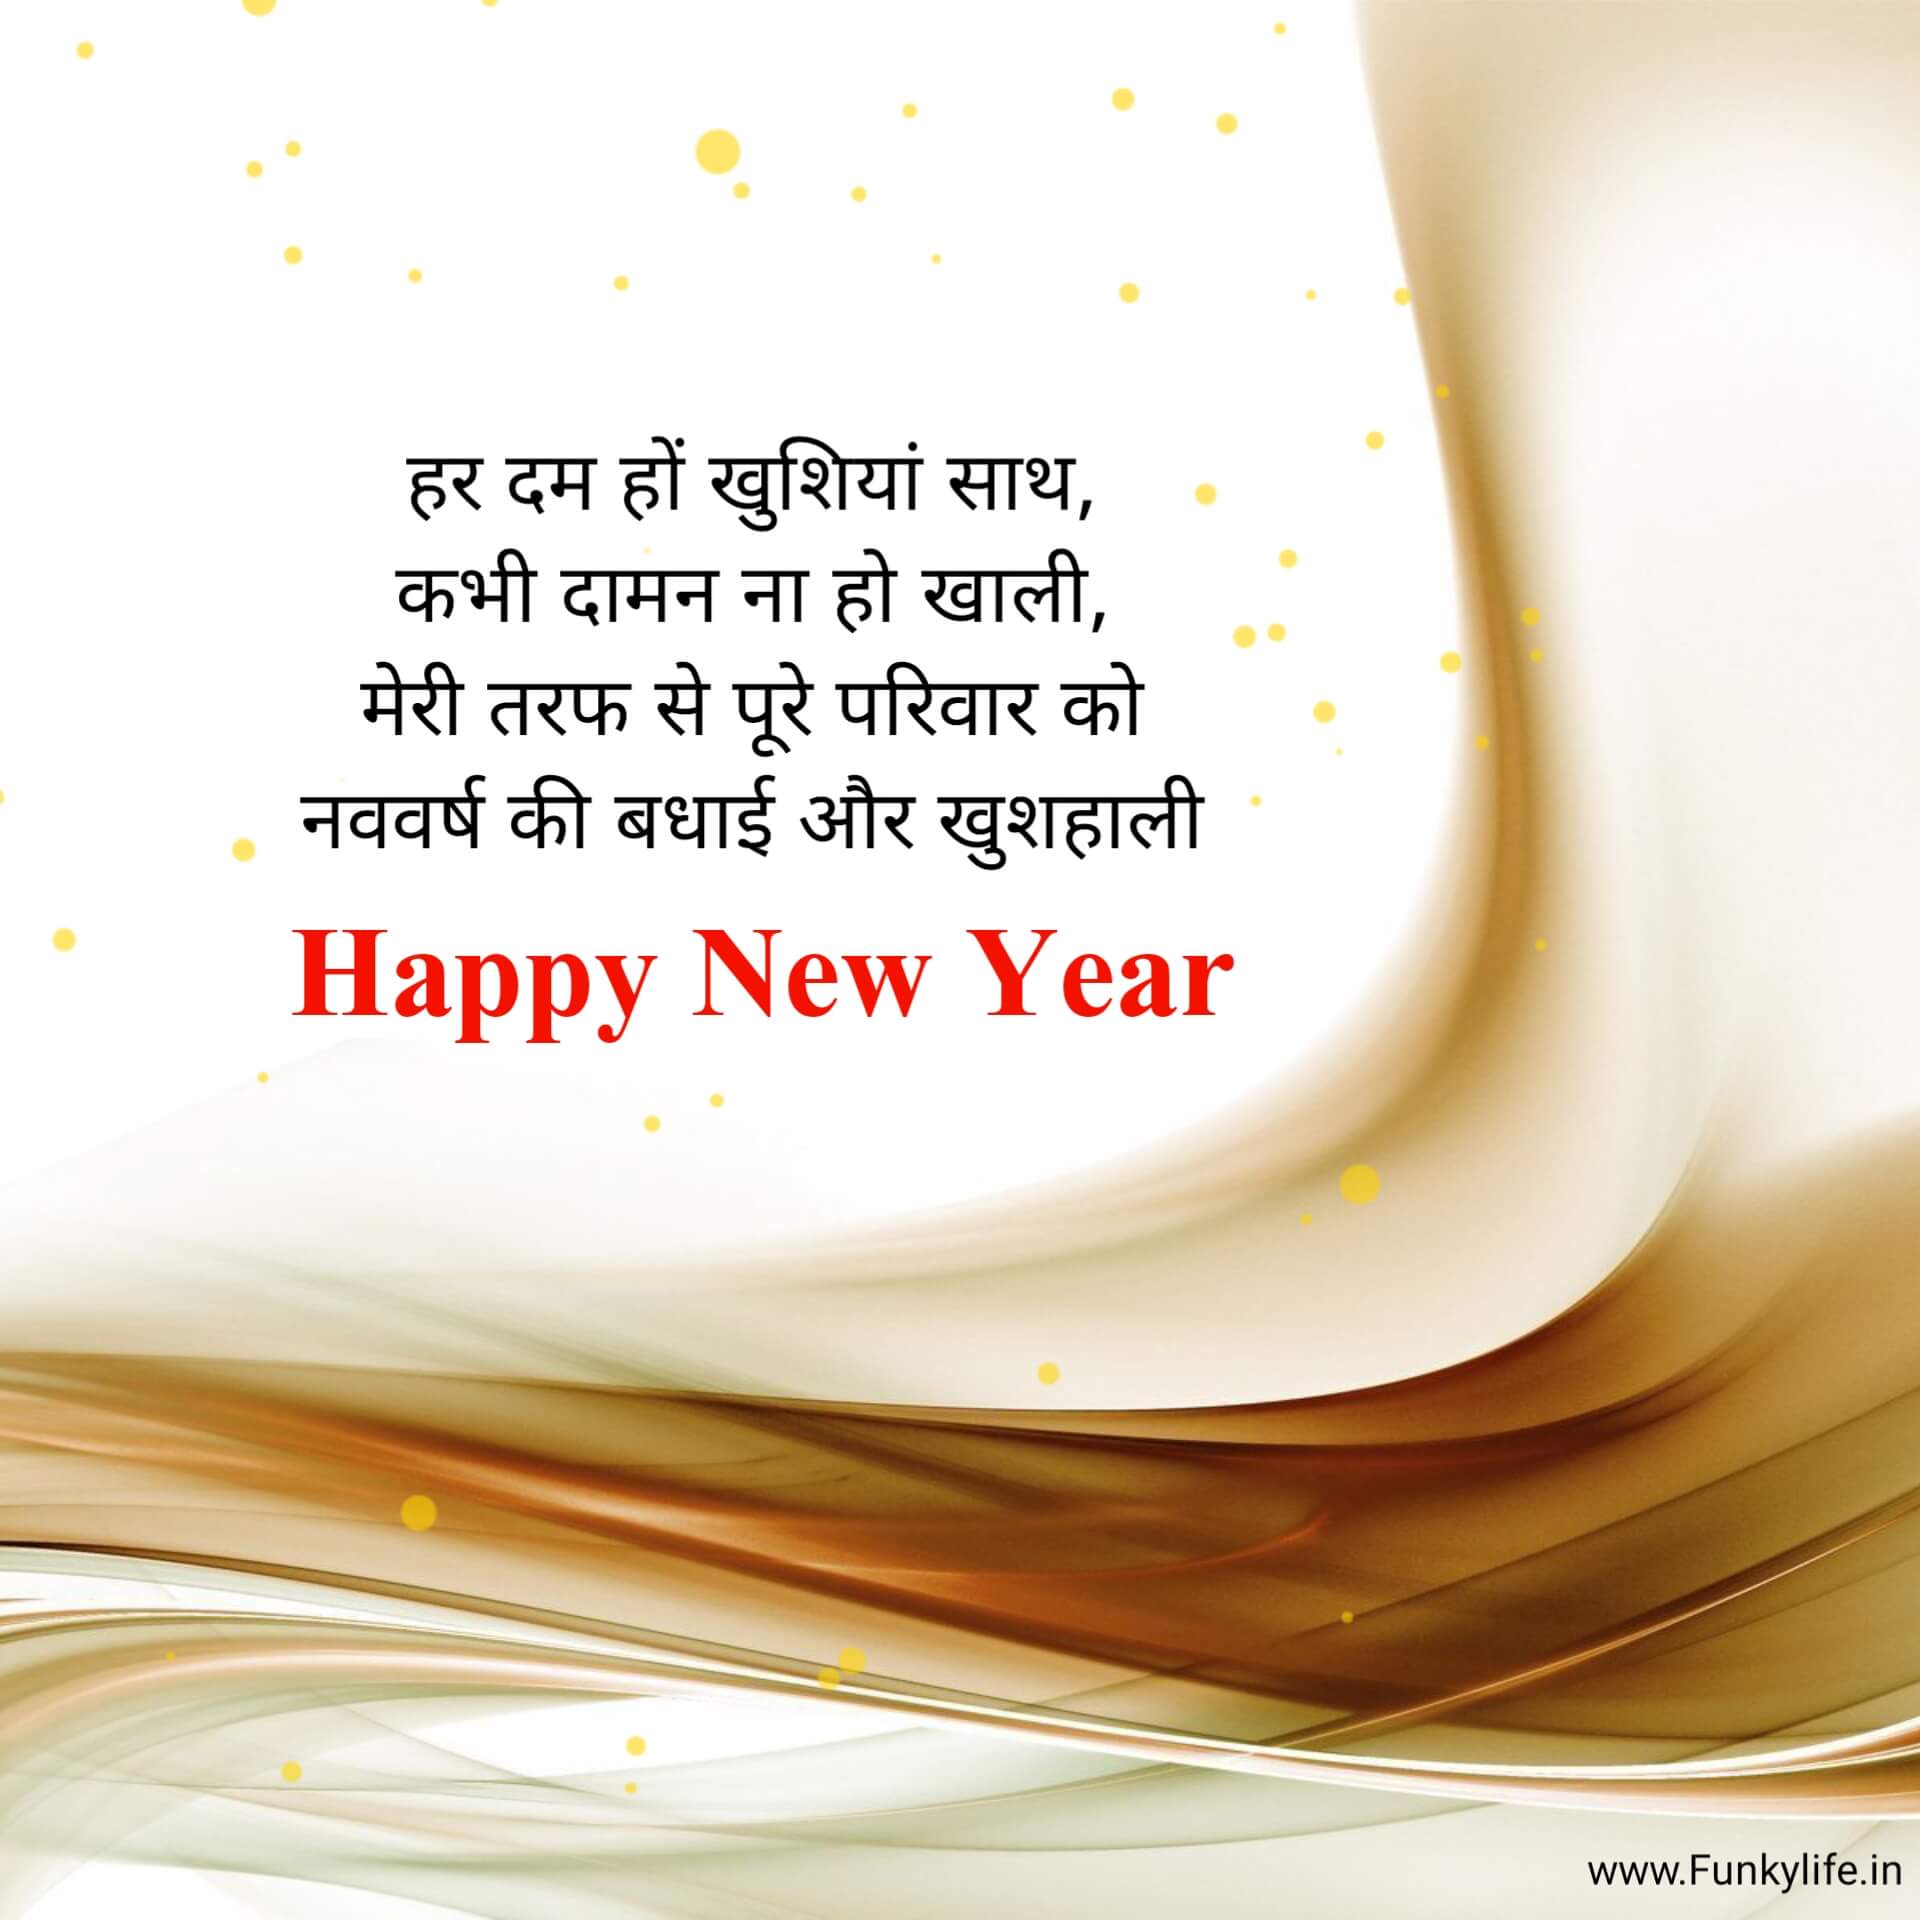 Happy New Year Wishes in Hindi for Family